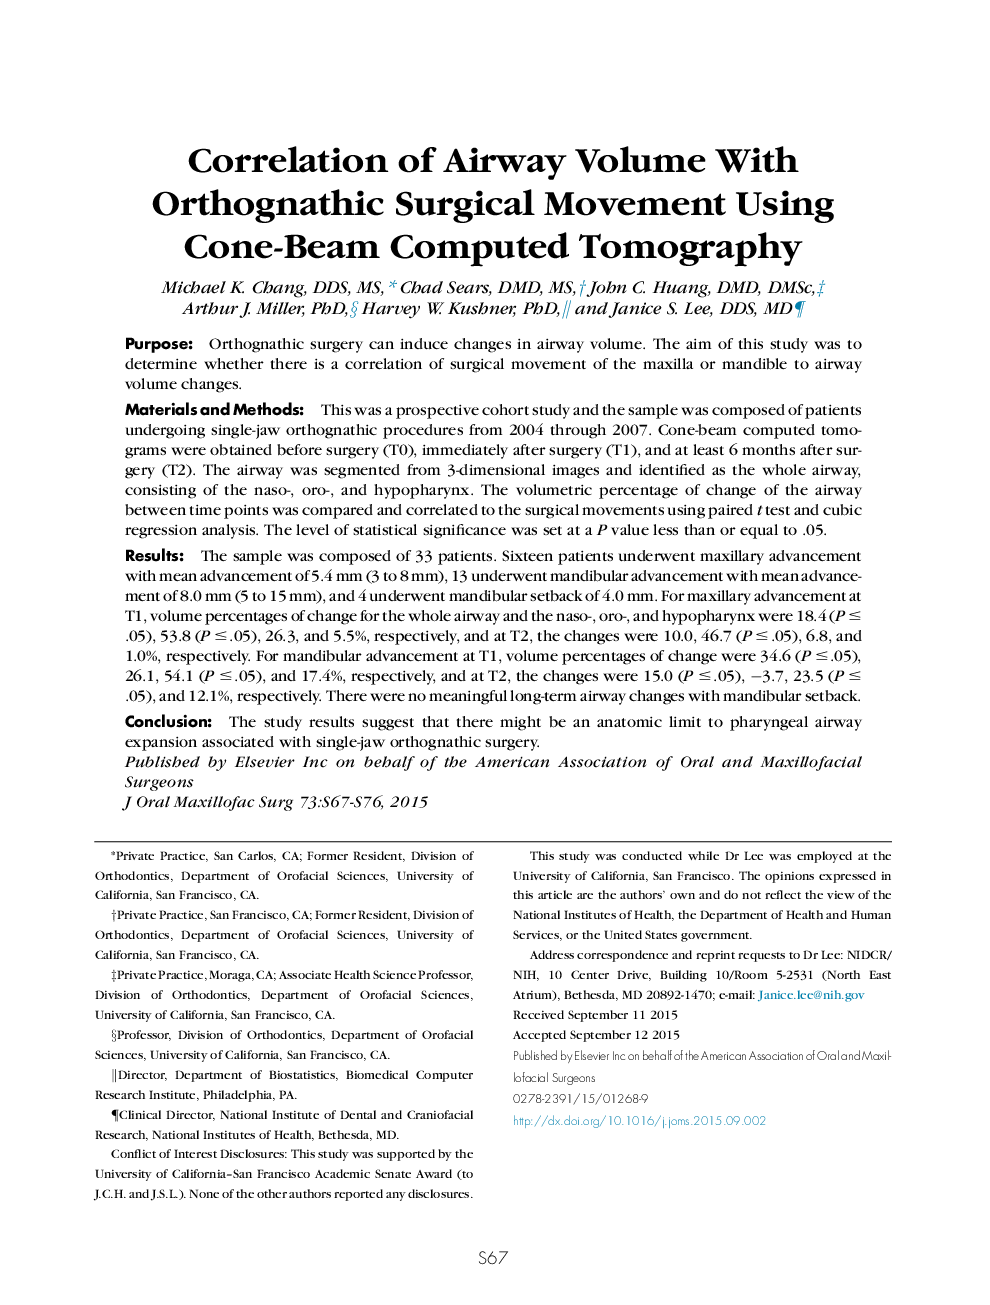 Correlation of Airway Volume With Orthognathic Surgical Movement Using Cone-Beam Computed Tomography 